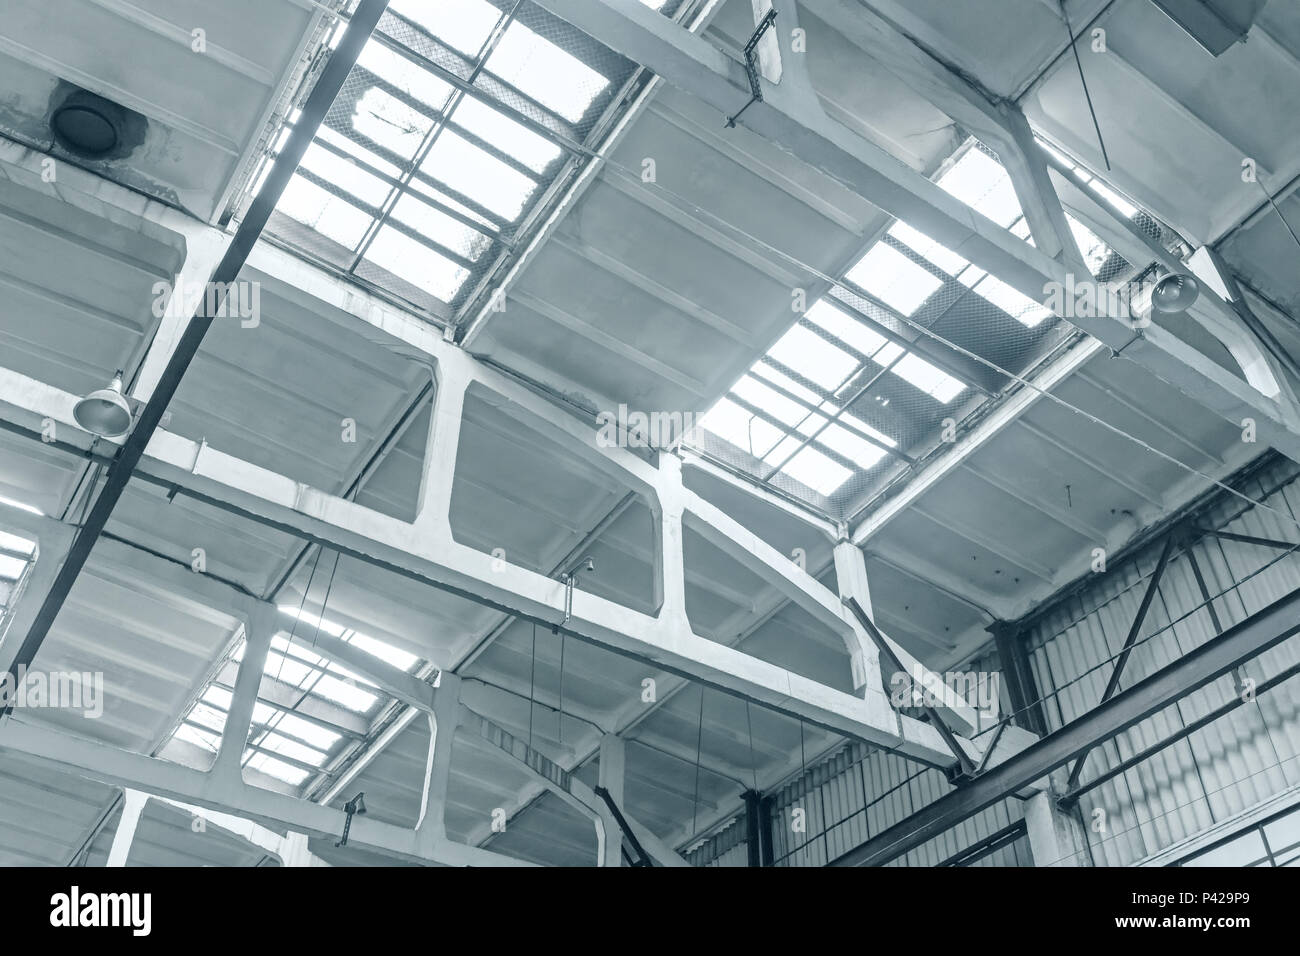 industrial ceiling structure with top lightning. large warehouse or factory interior Stock Photo